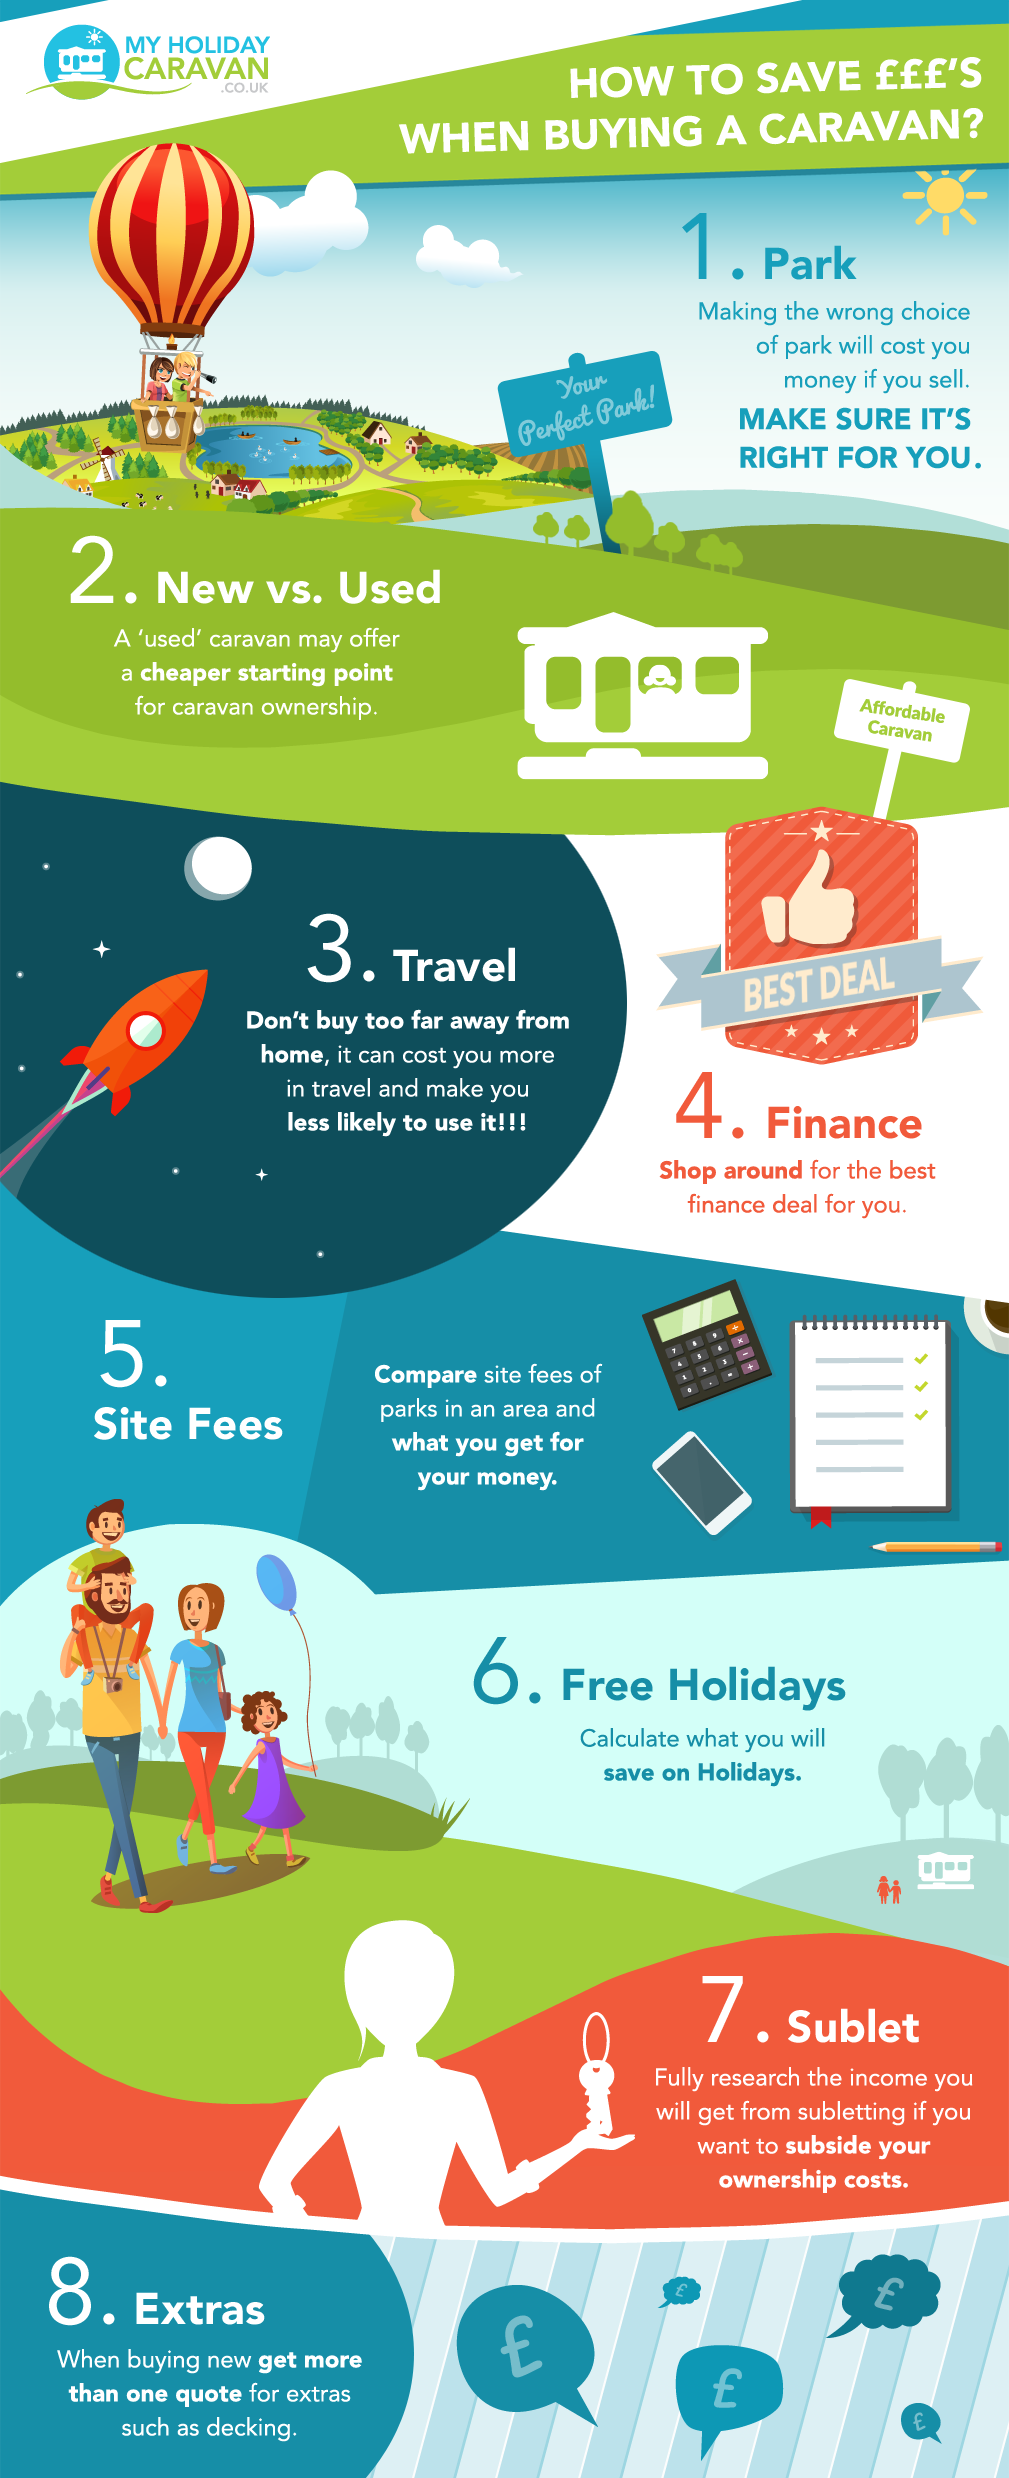 How to save £££s when buying a caravan infographic